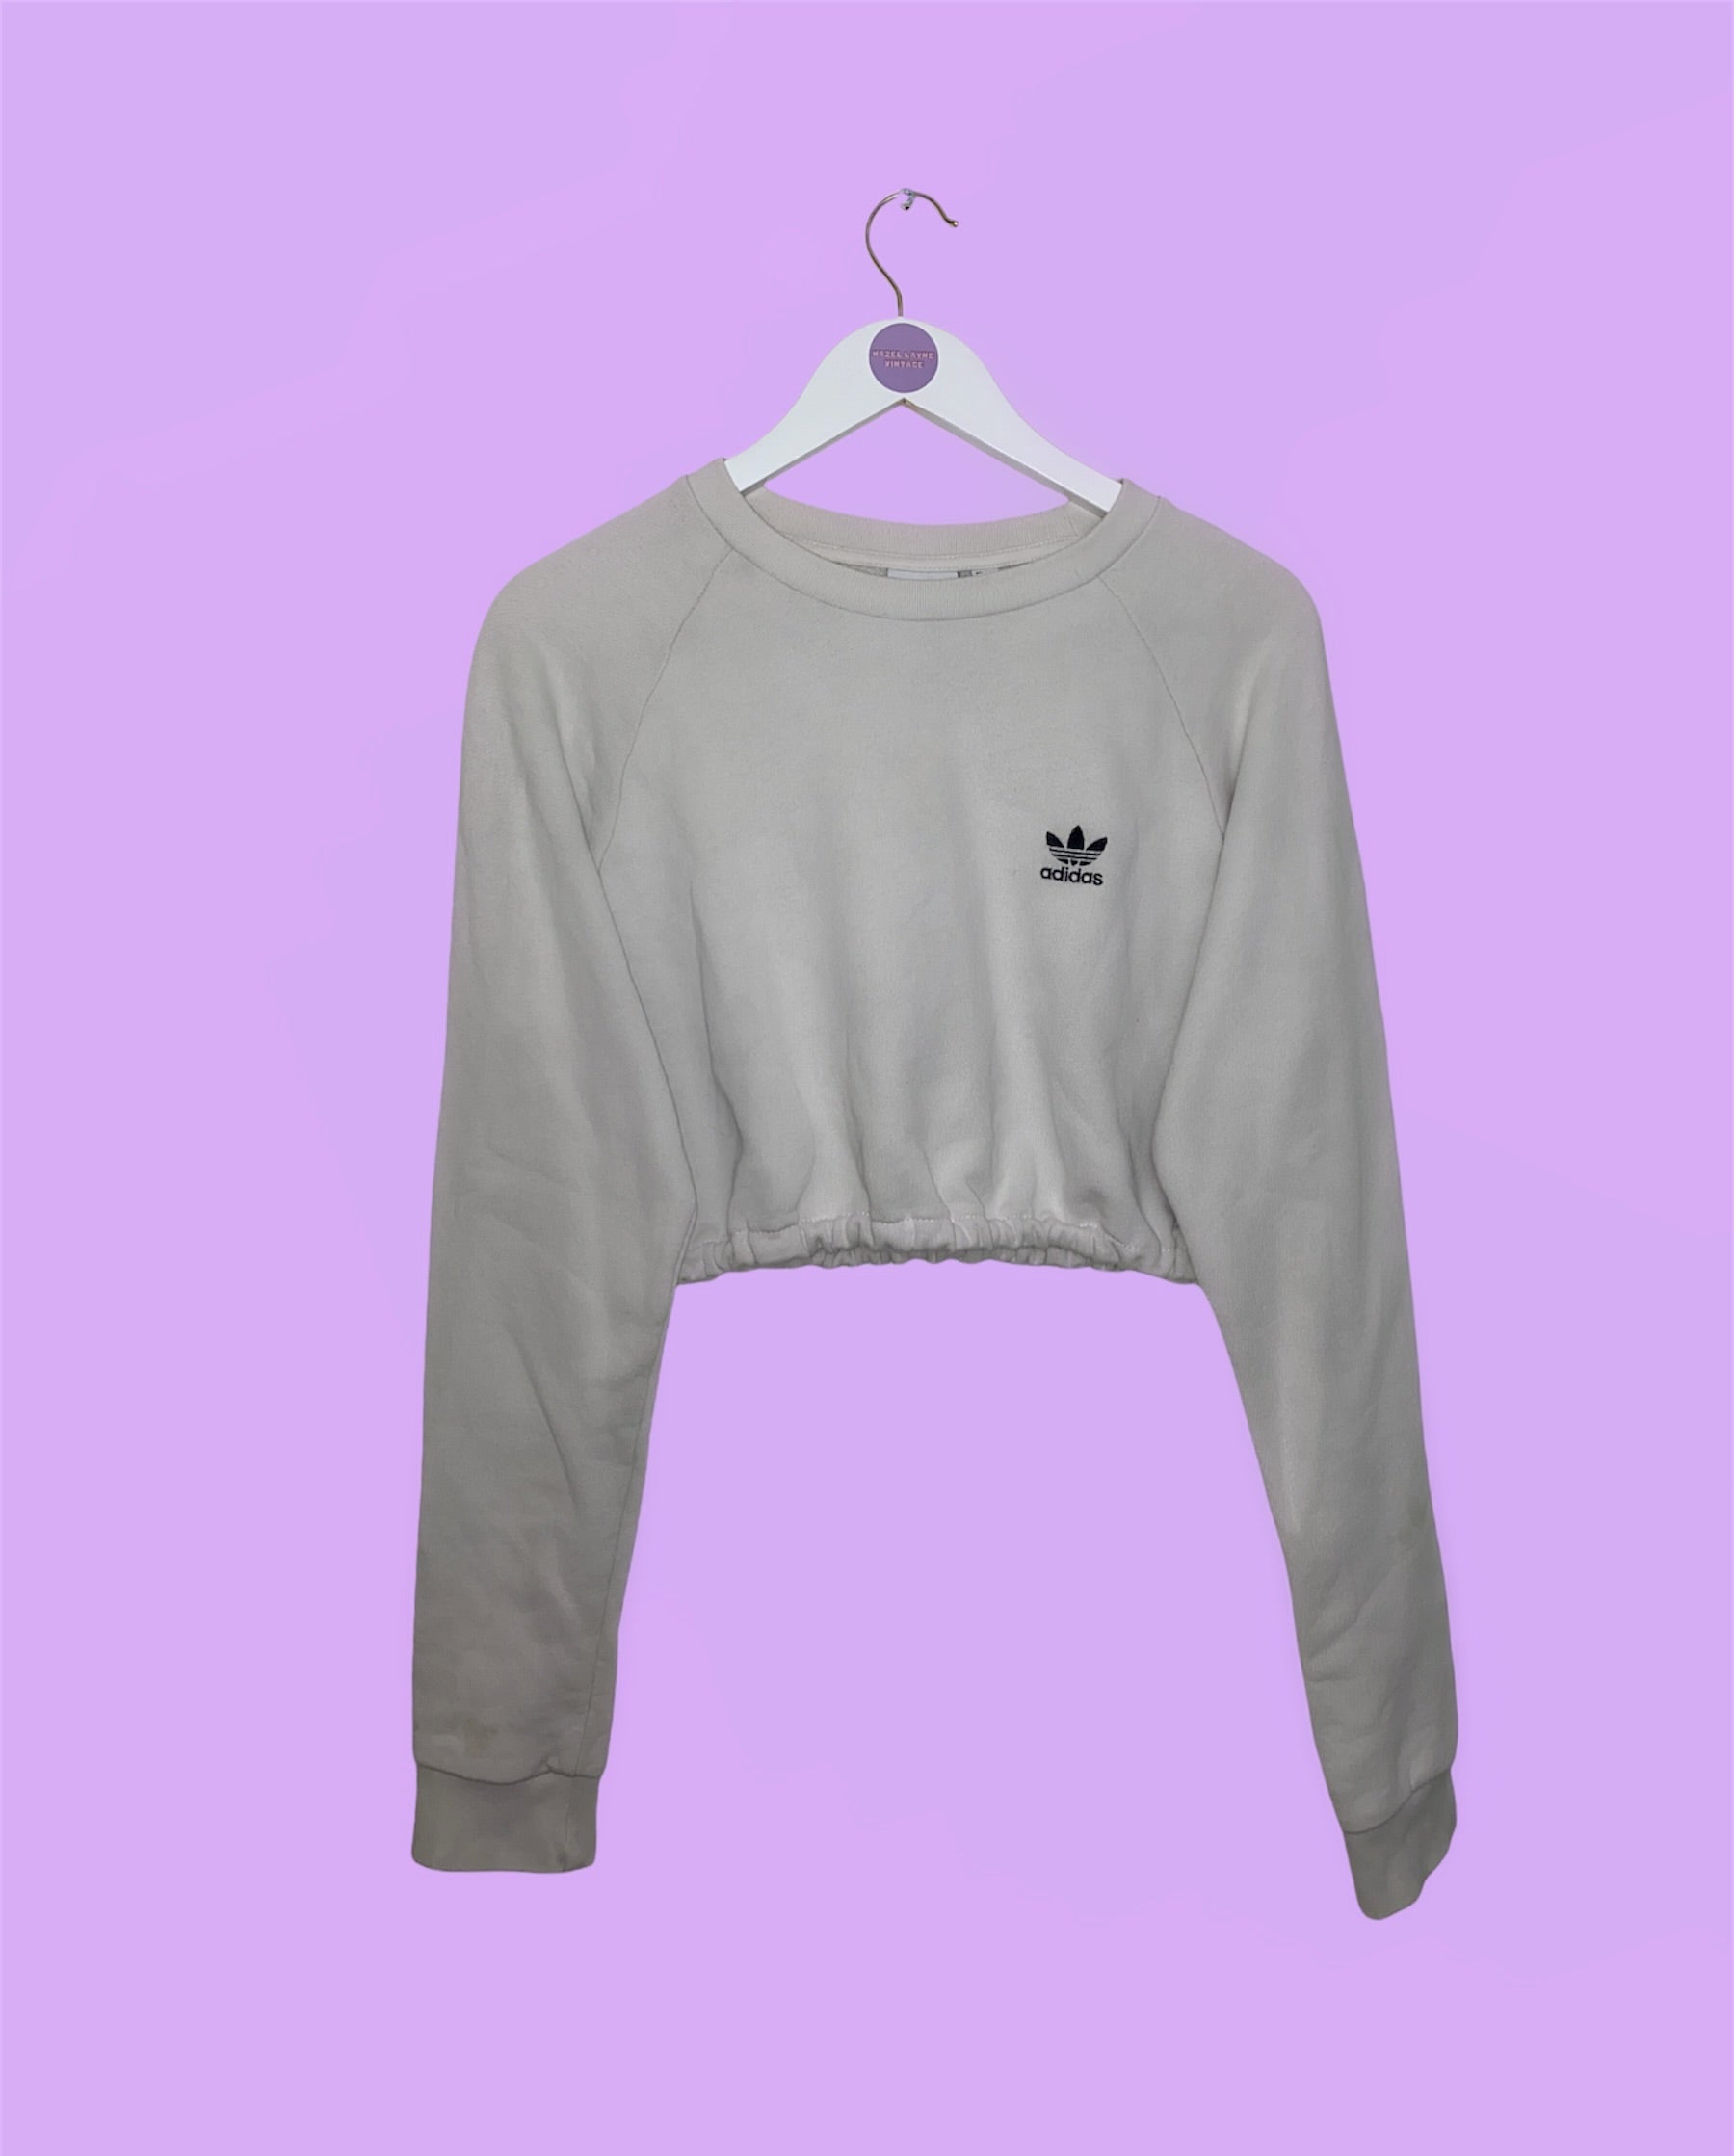 white cropped sweatshirt with black small adidas logo on chest shown on a white clothes hanger on a lilac background